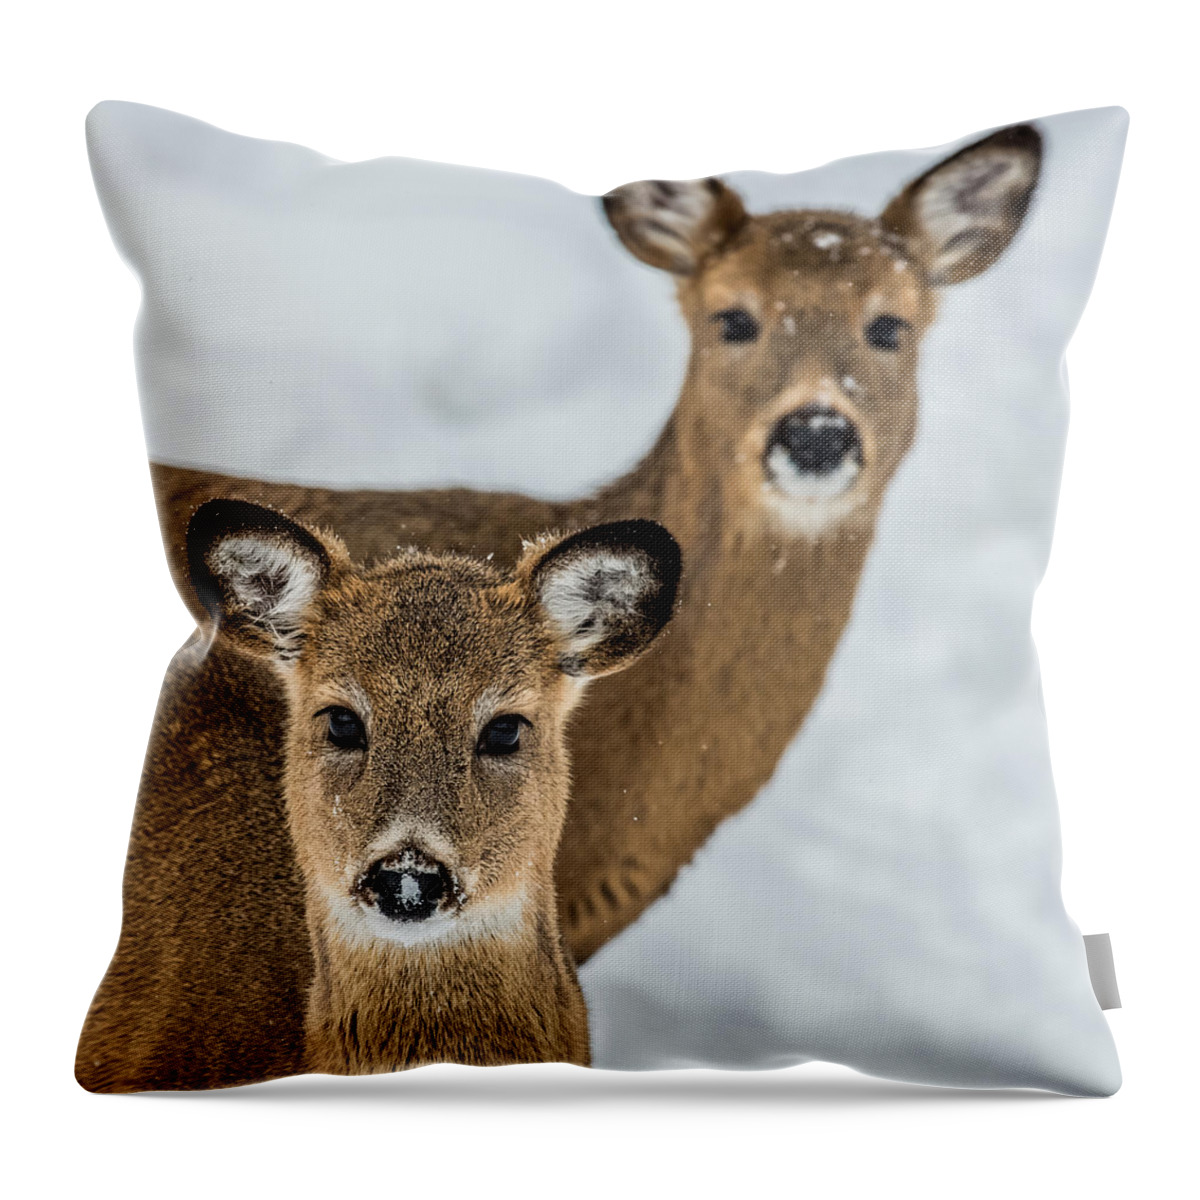 Deer Throw Pillow featuring the photograph Curious Does by Paul Freidlund